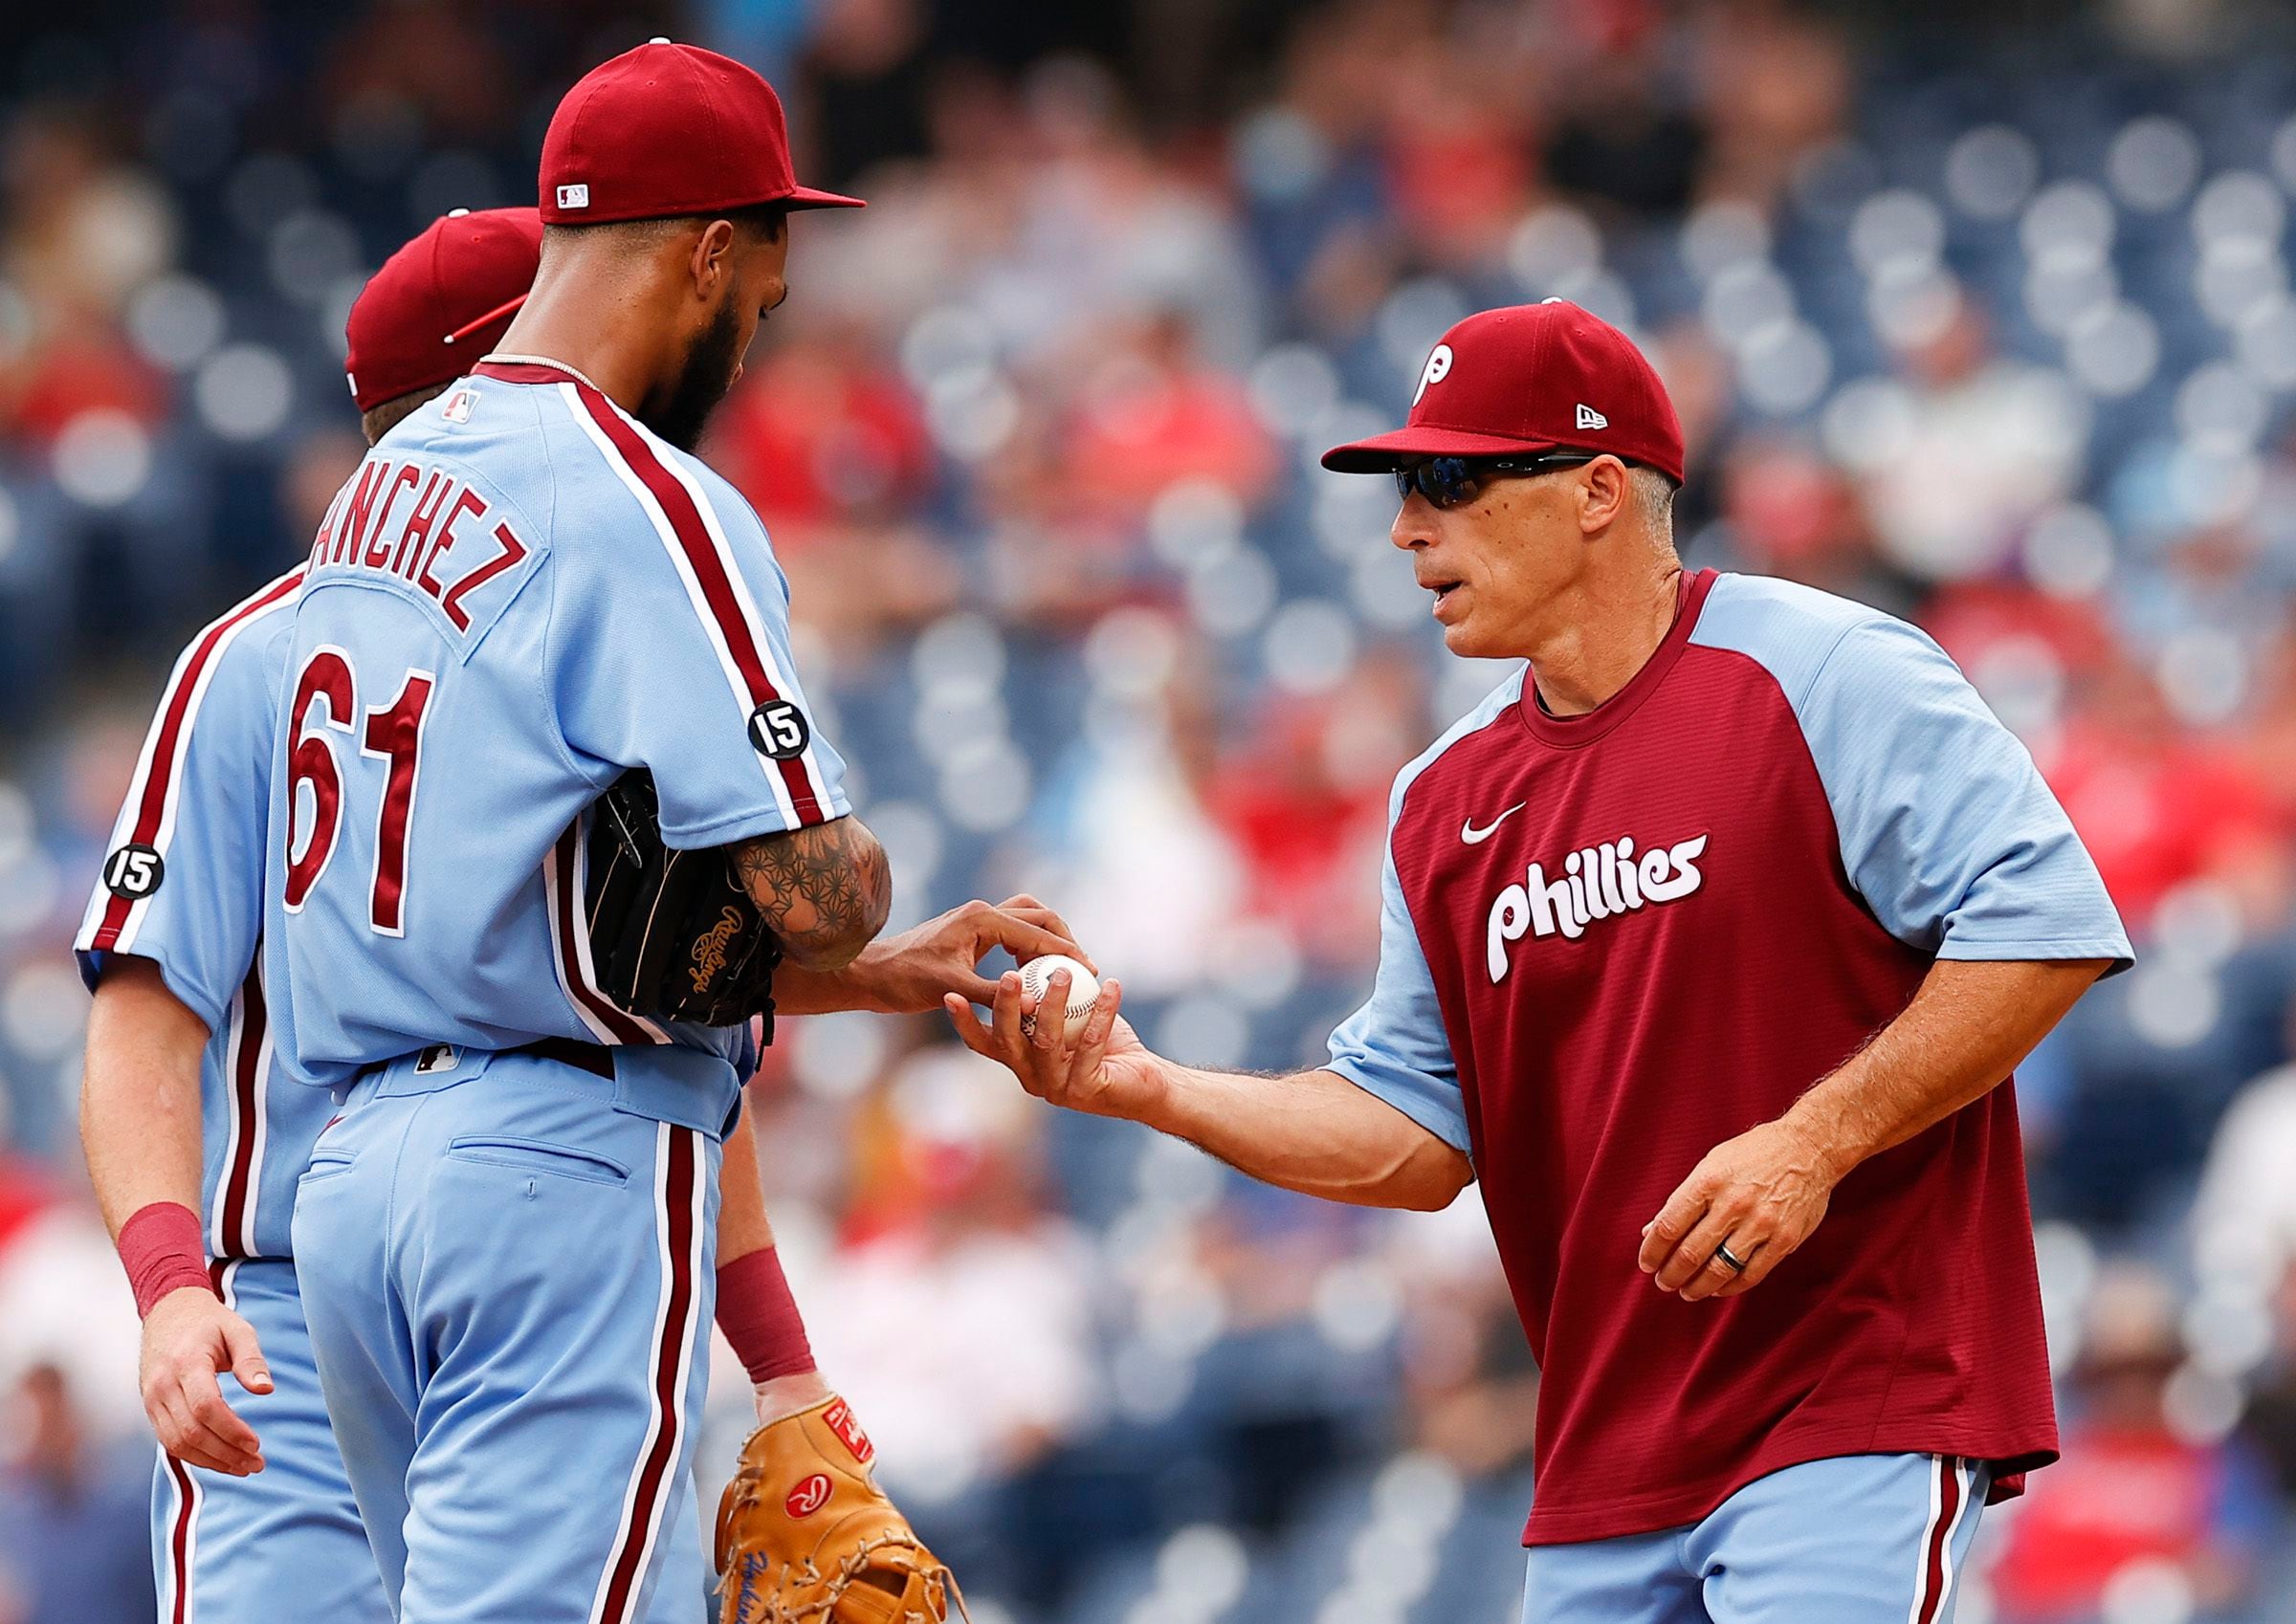 Brad Miller's grand slam gives Phillies improbable 11-8 win and